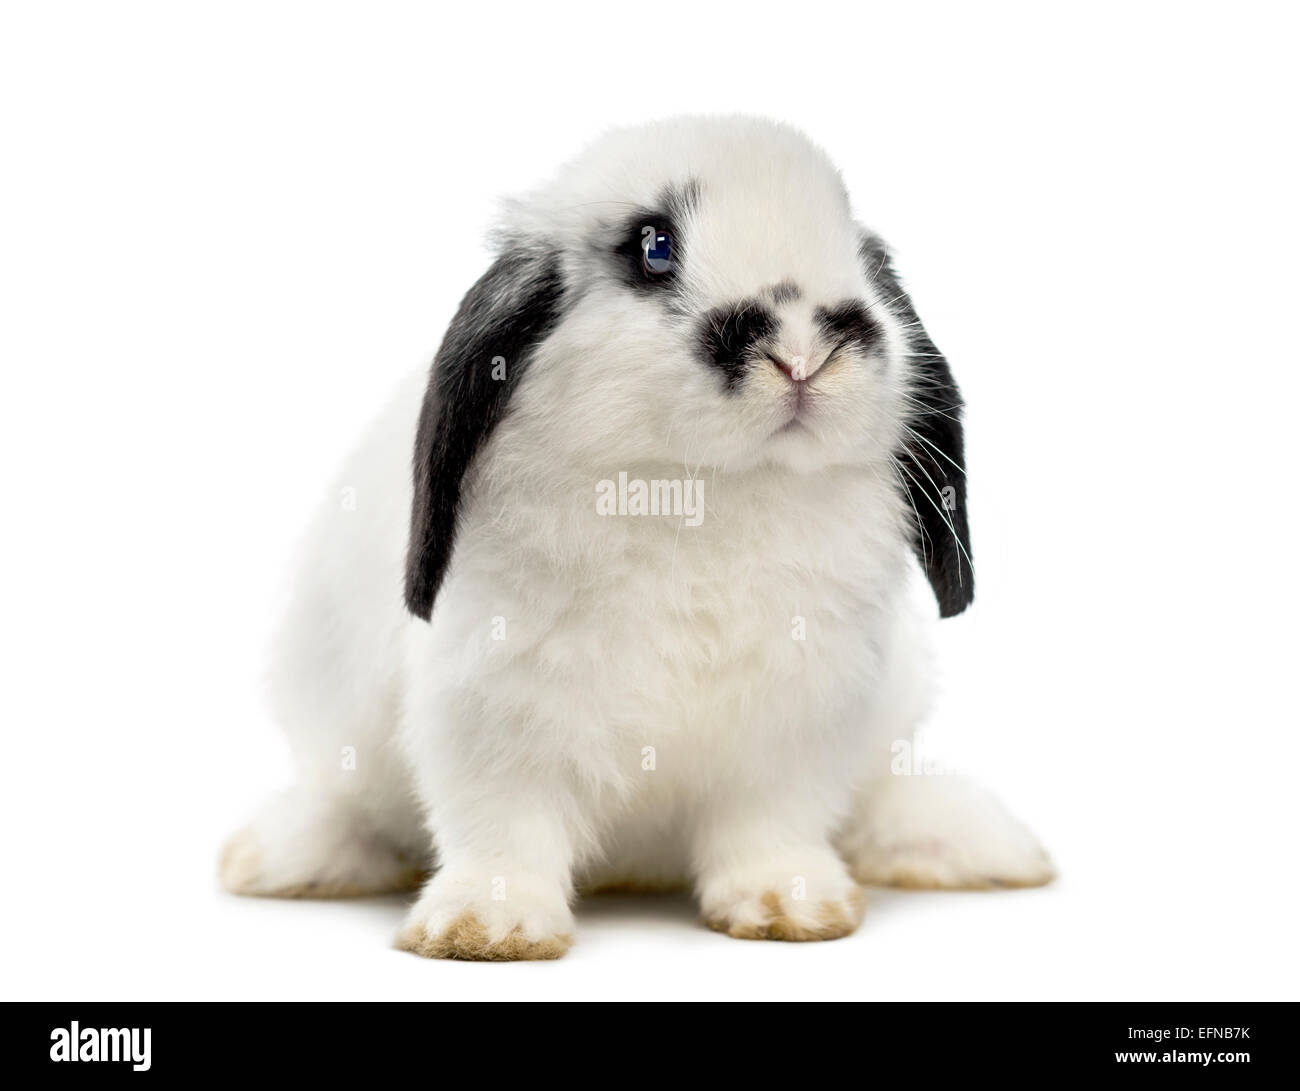 Lop rabbit against white background Stock Photo